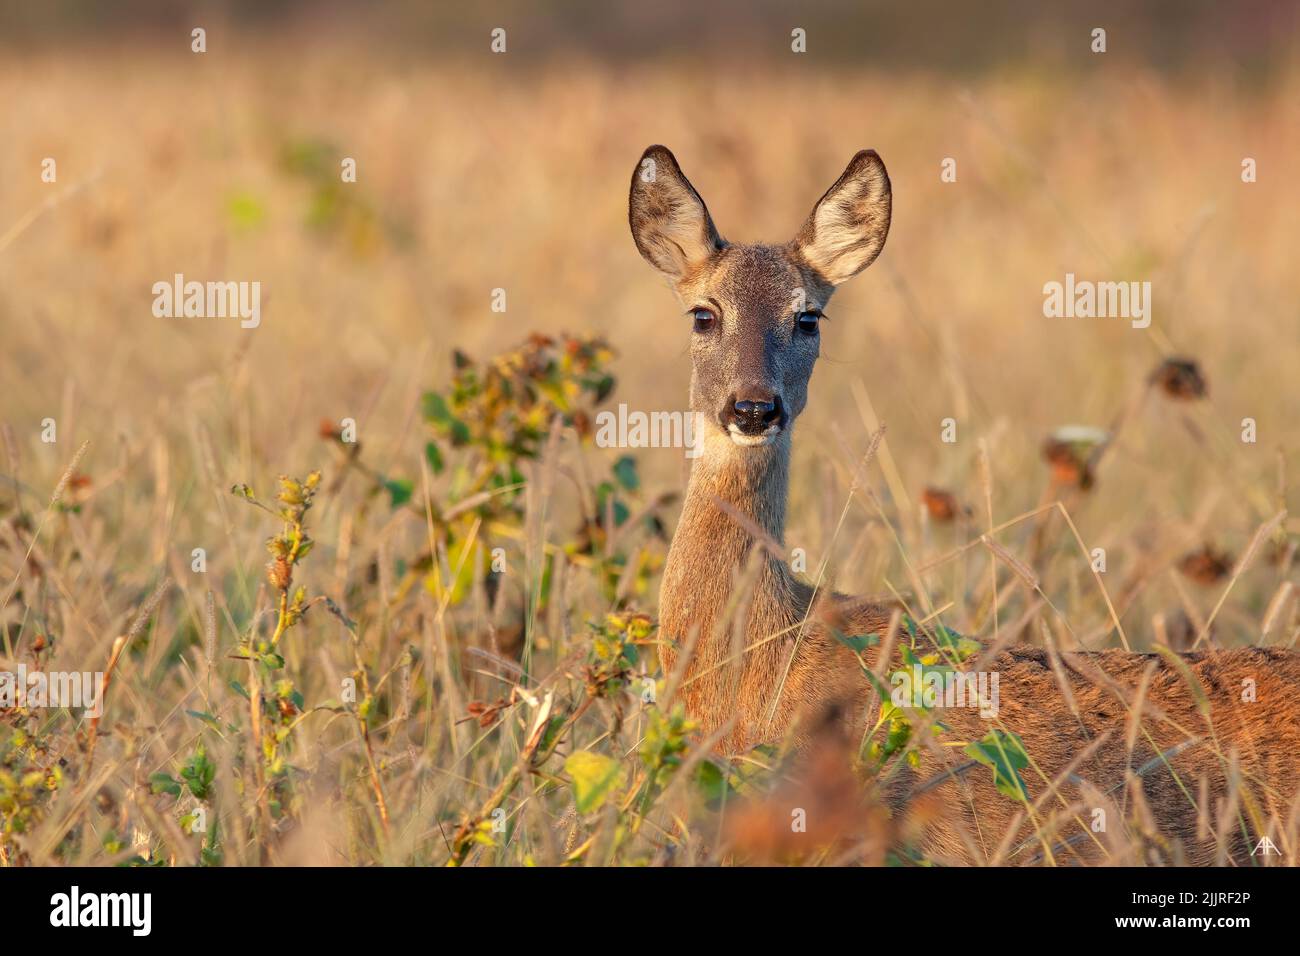 A beautiful view of a deer in a field Stock Photo